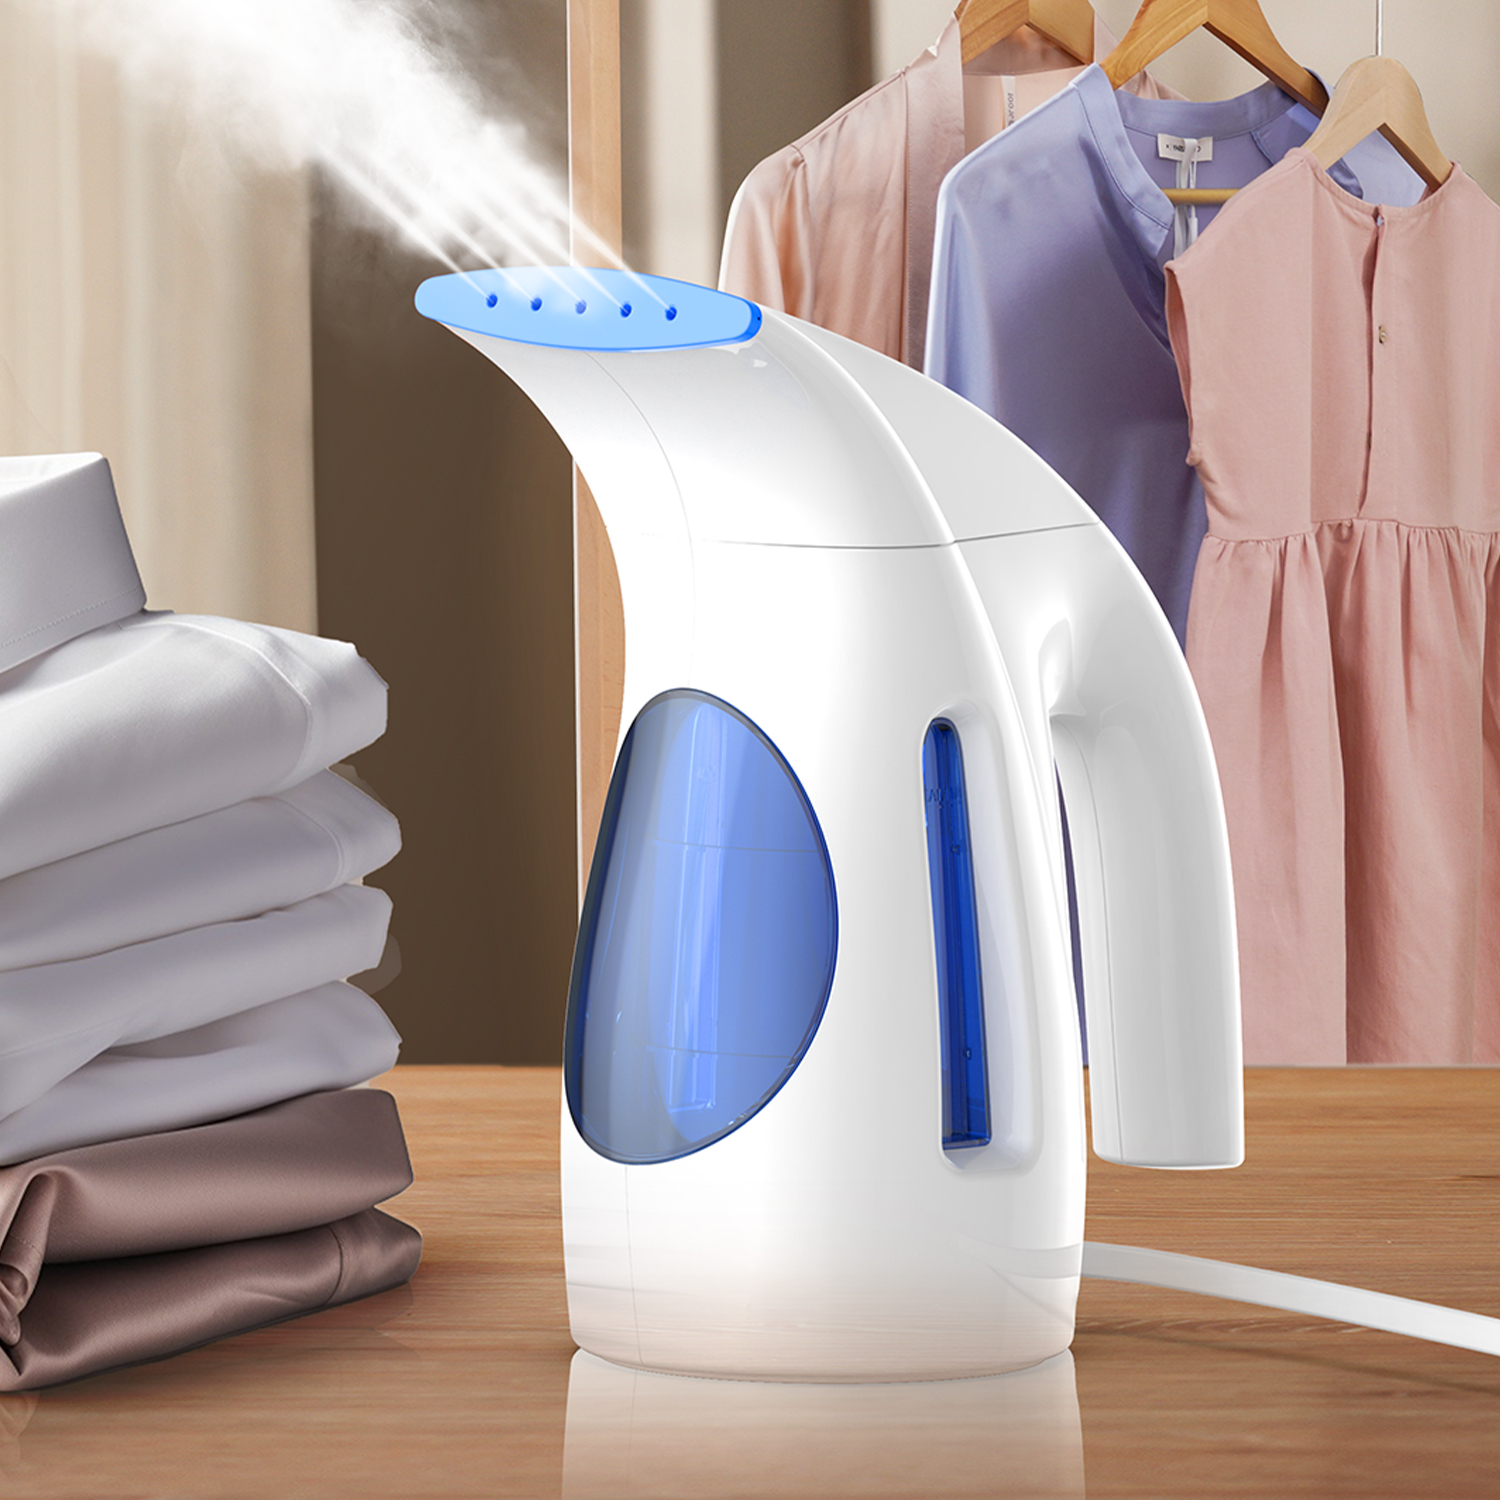 

Steamer For Clothes, Portable Handheld Design, 240ml Big Capacity, 700w, Strong Penetrating Steam, Removes Wrinkle, For Home, Office And Travel